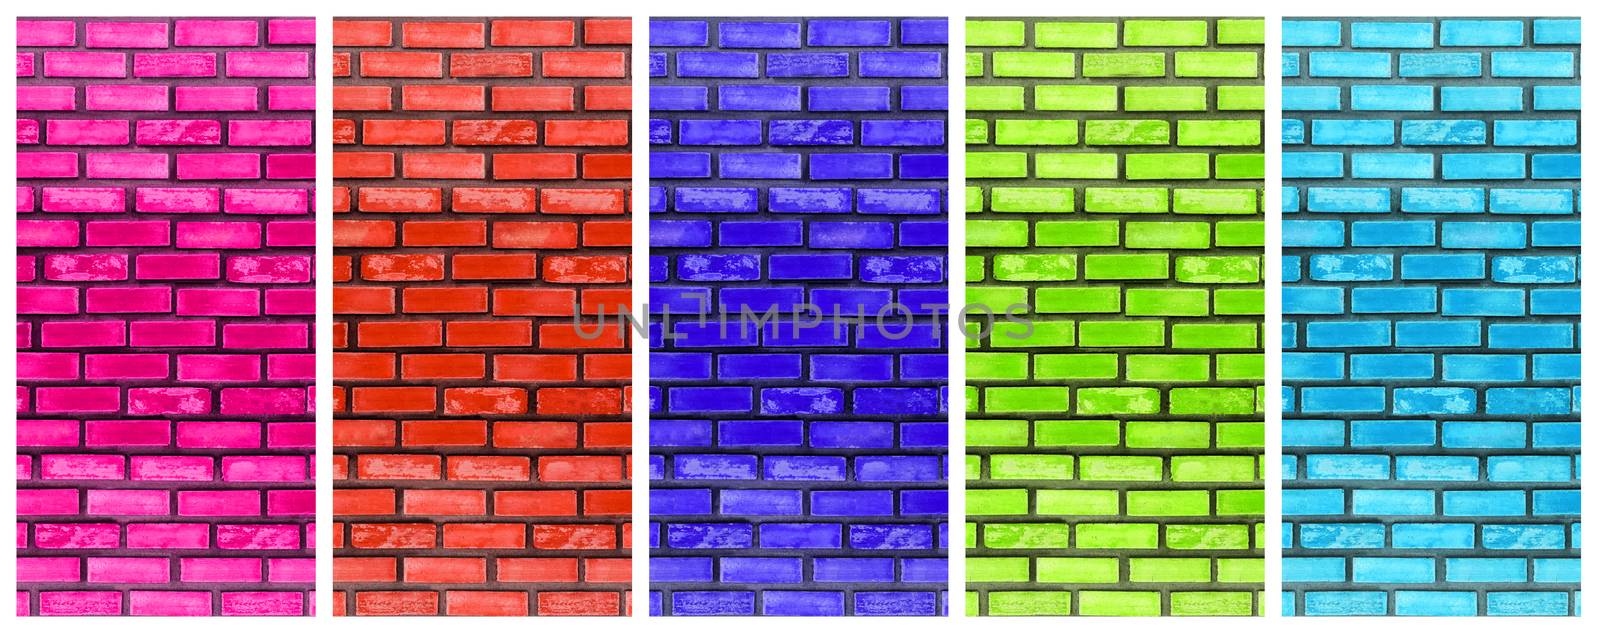 Texture of colorful block brick wall. Abstract background. by TEERASAK